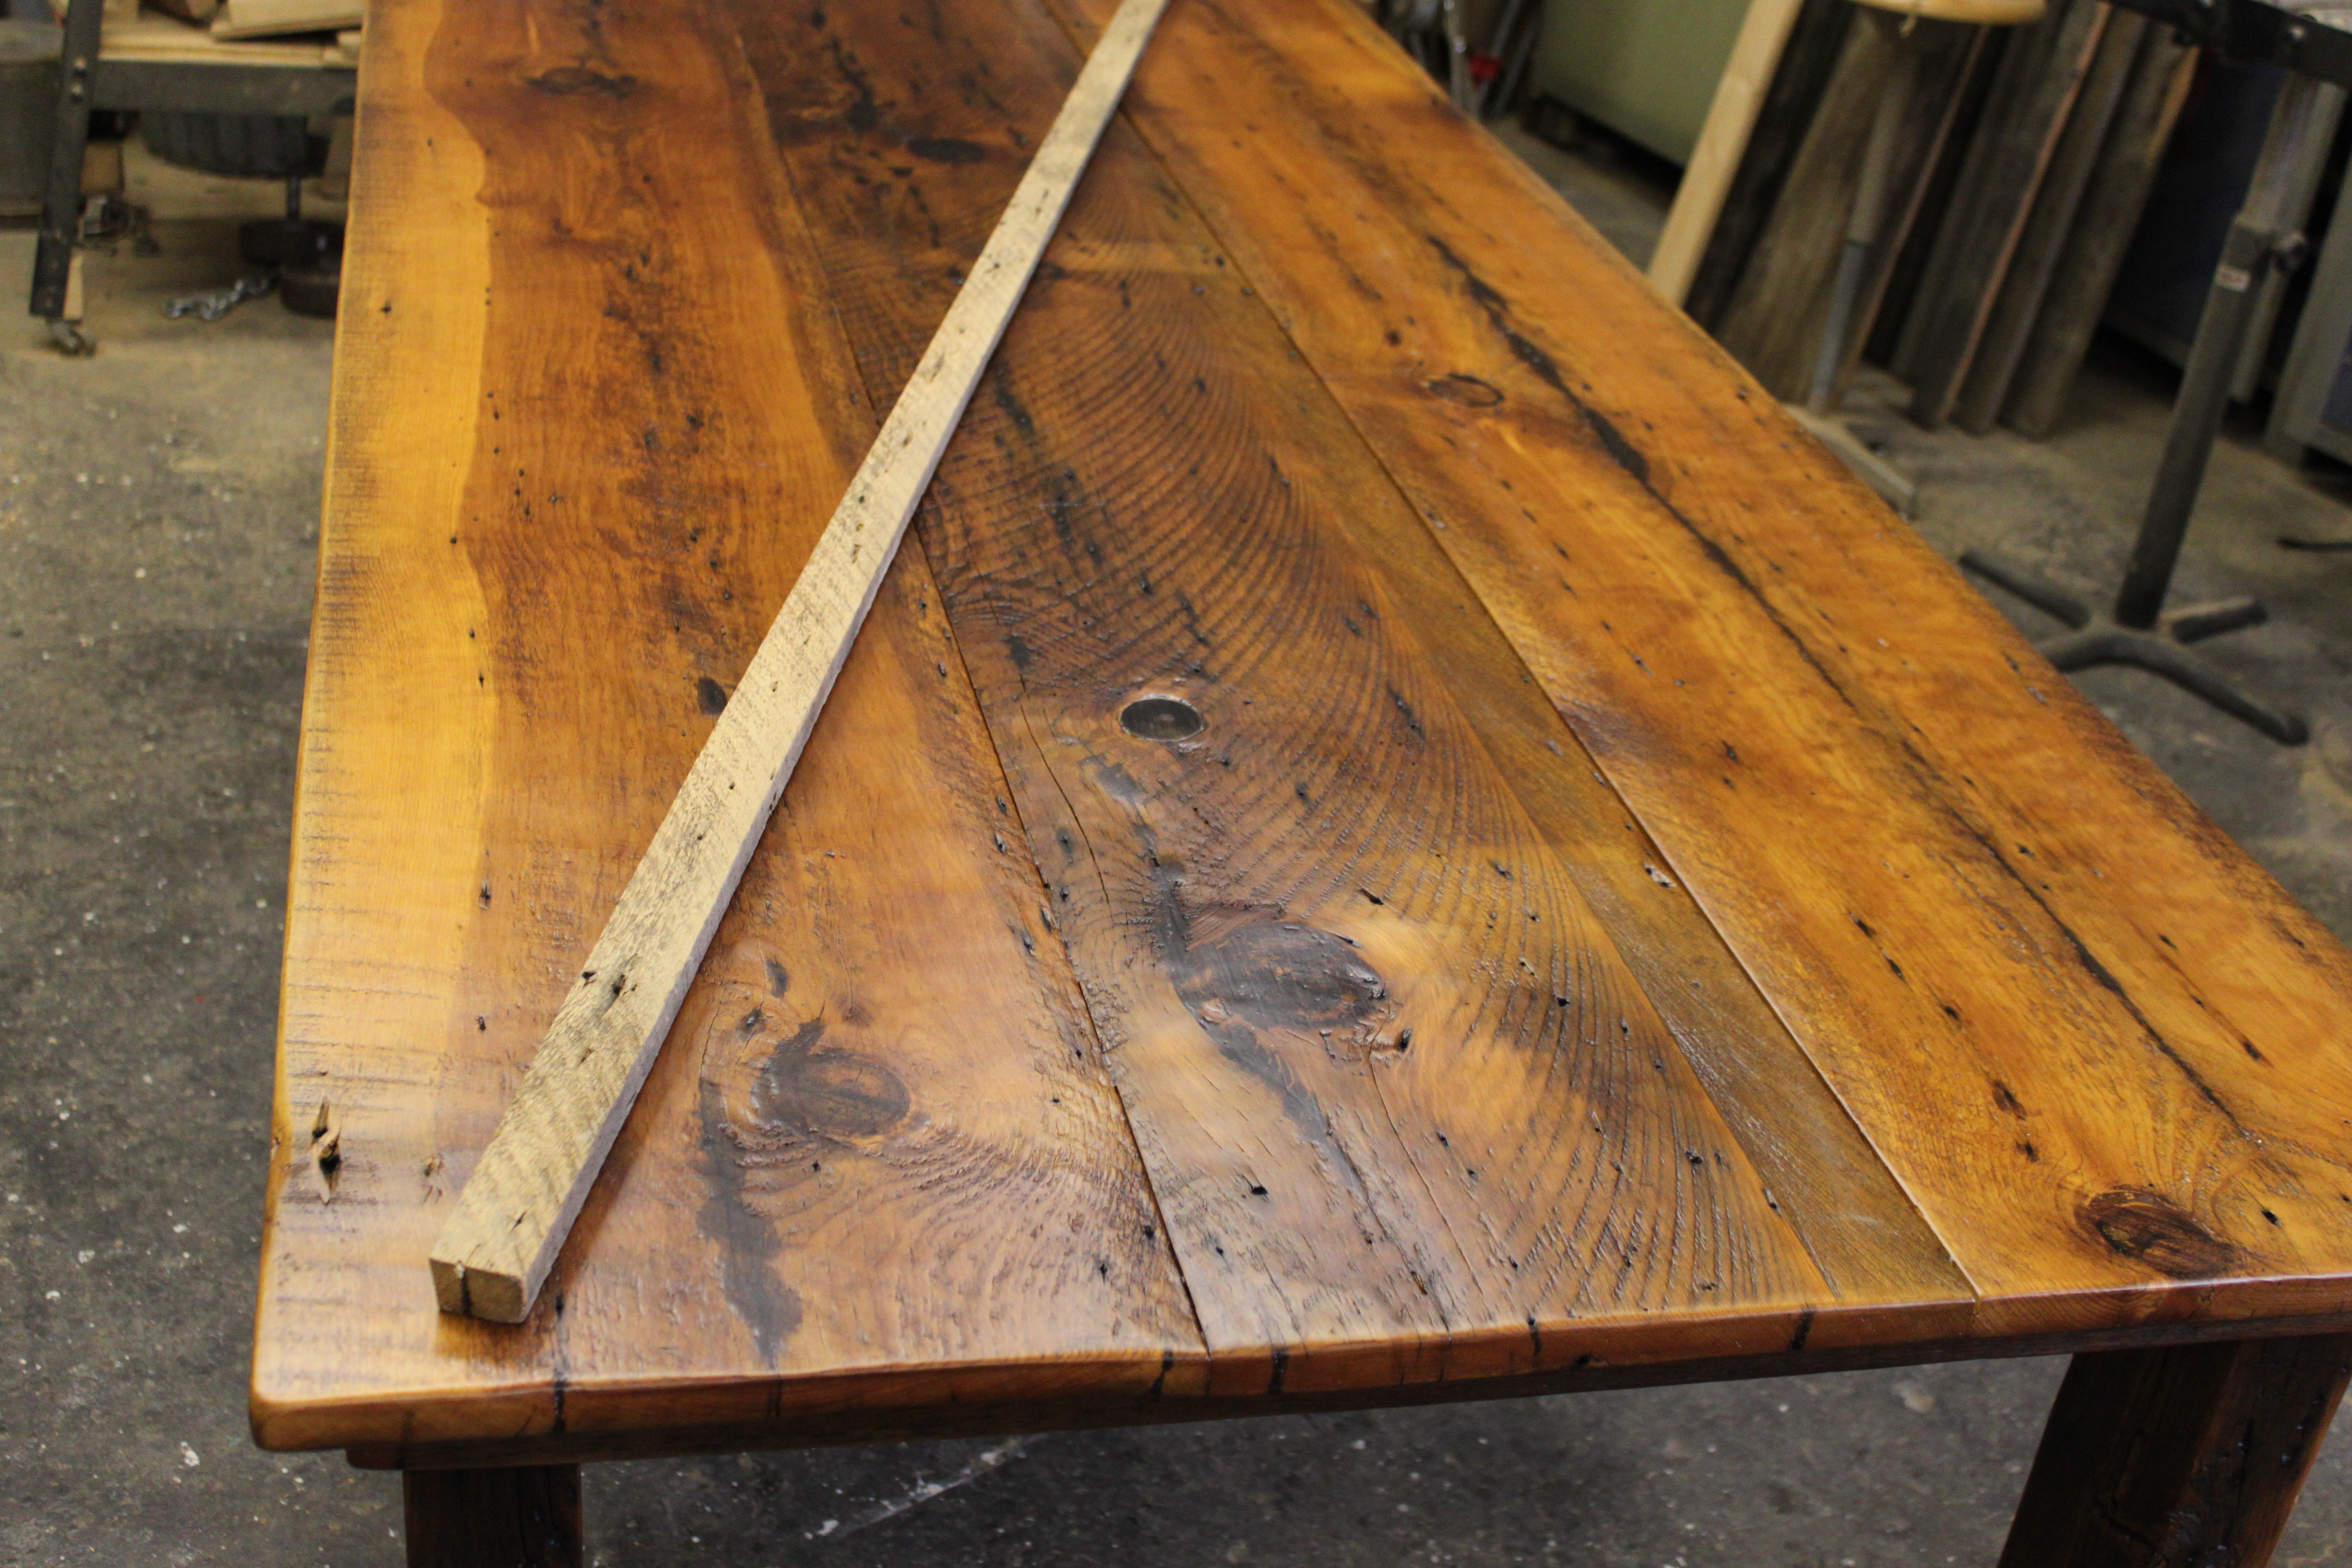 The character and the beauty of a finished tabletop - this is the 